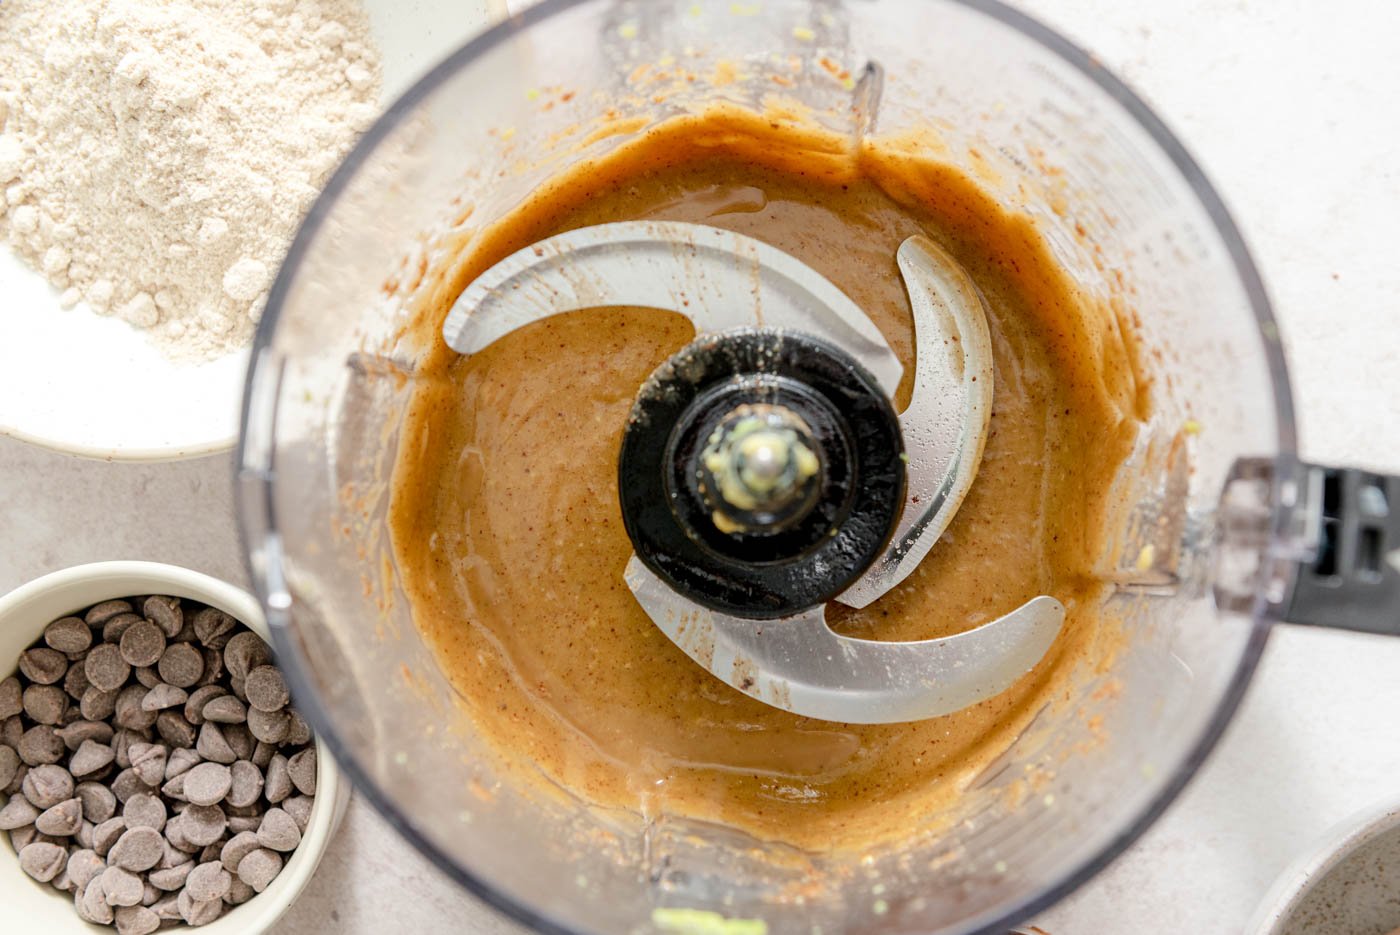 A creamy caramel-like mixture in the bowl of a food processor.